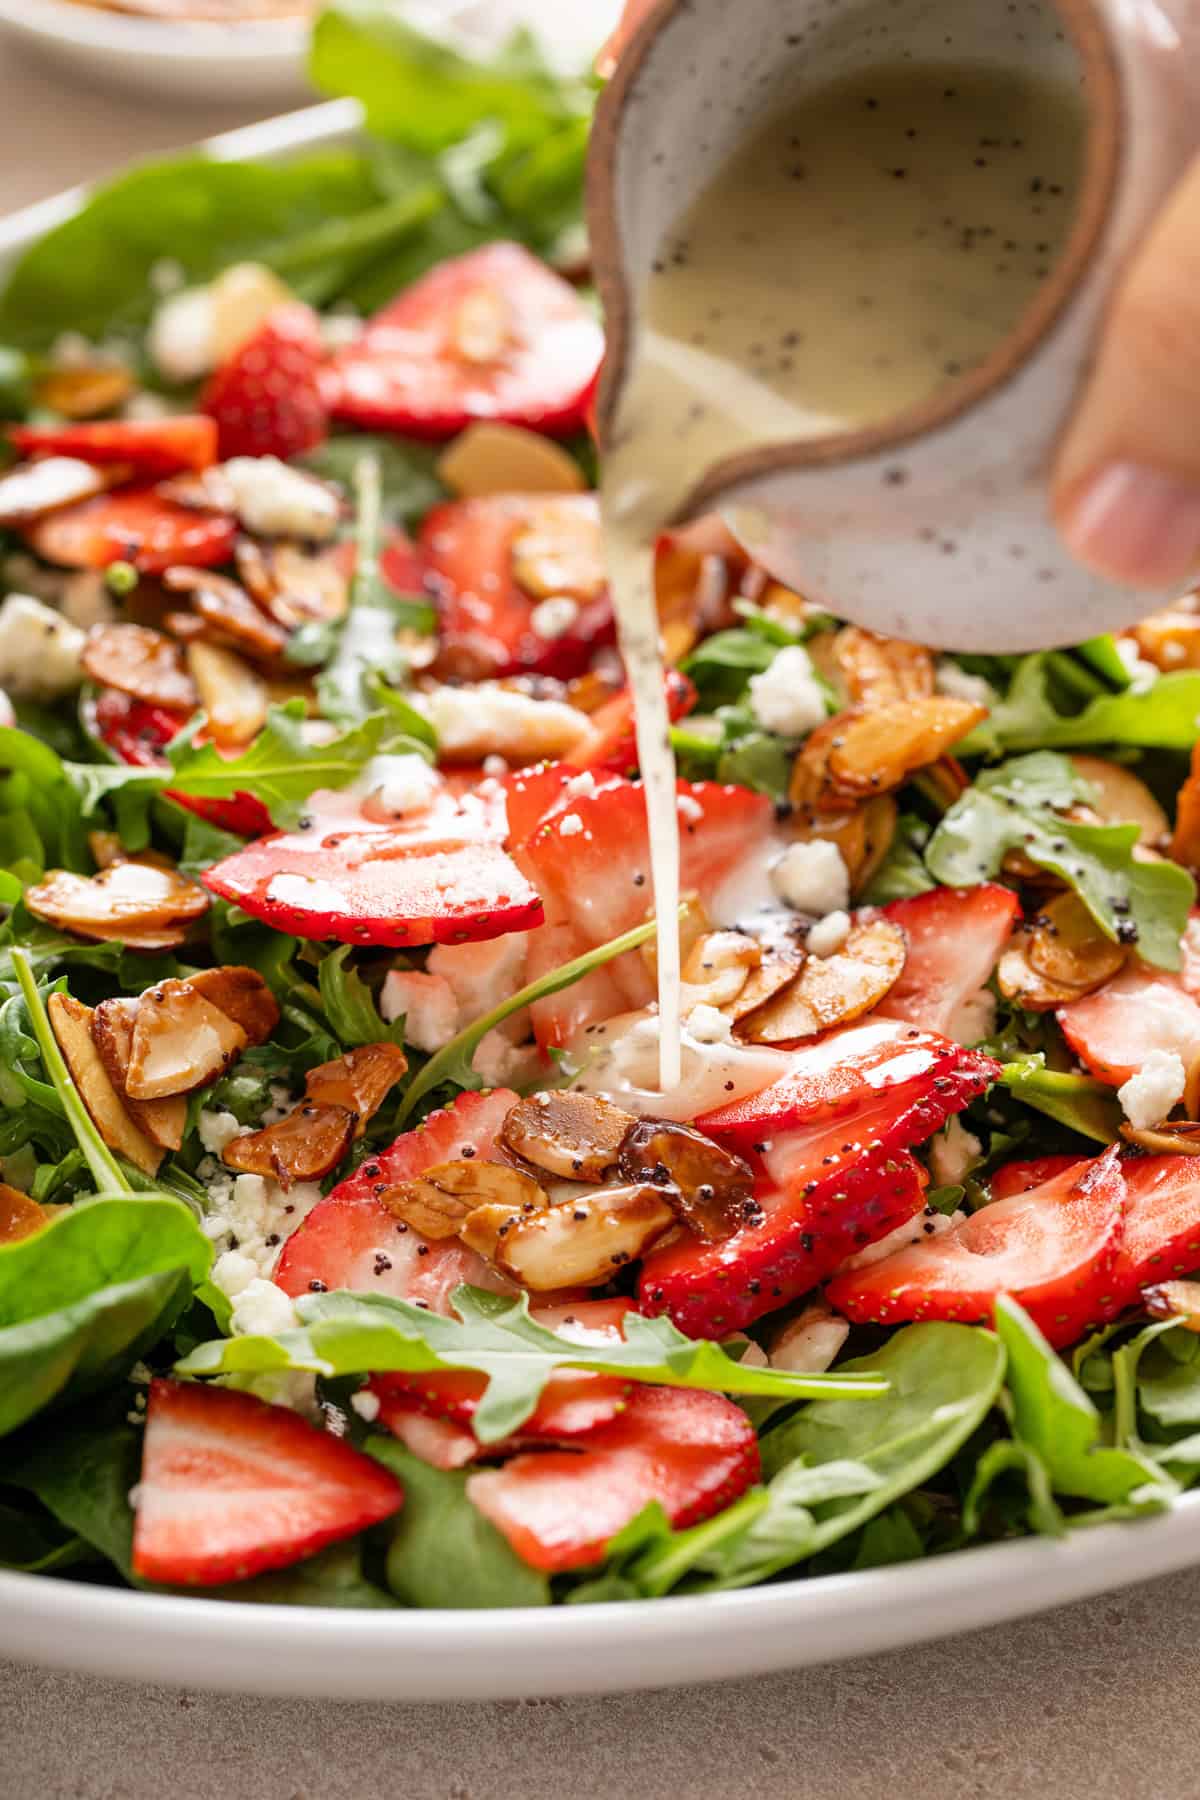 Poppy seed dressing being poured over the top of a strawberry spinach salad.